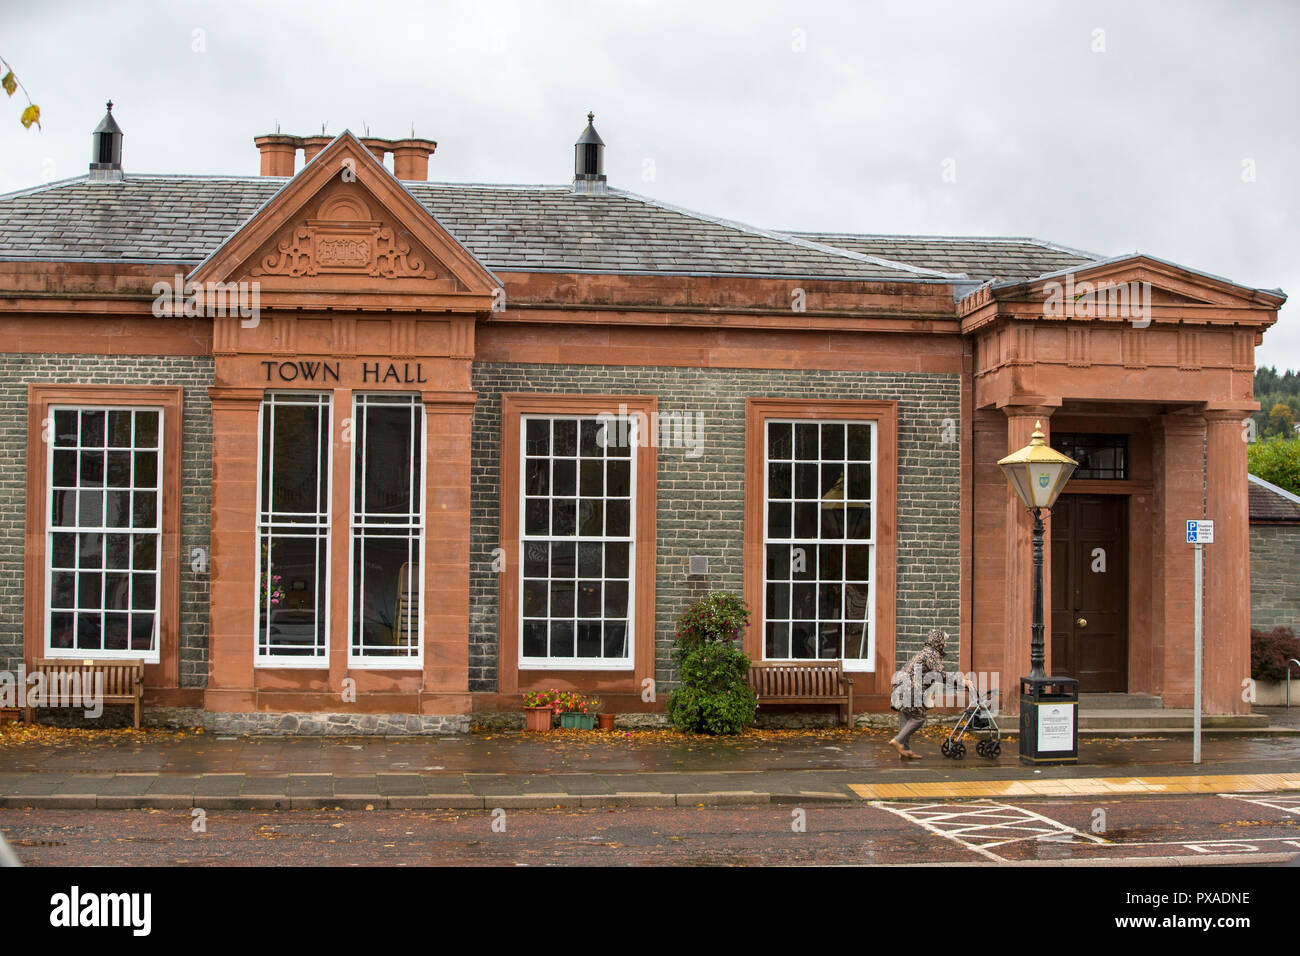 The Town Hall in Moffat a town in Dumfries and Galloway, Scotland, UK. Stock Photo